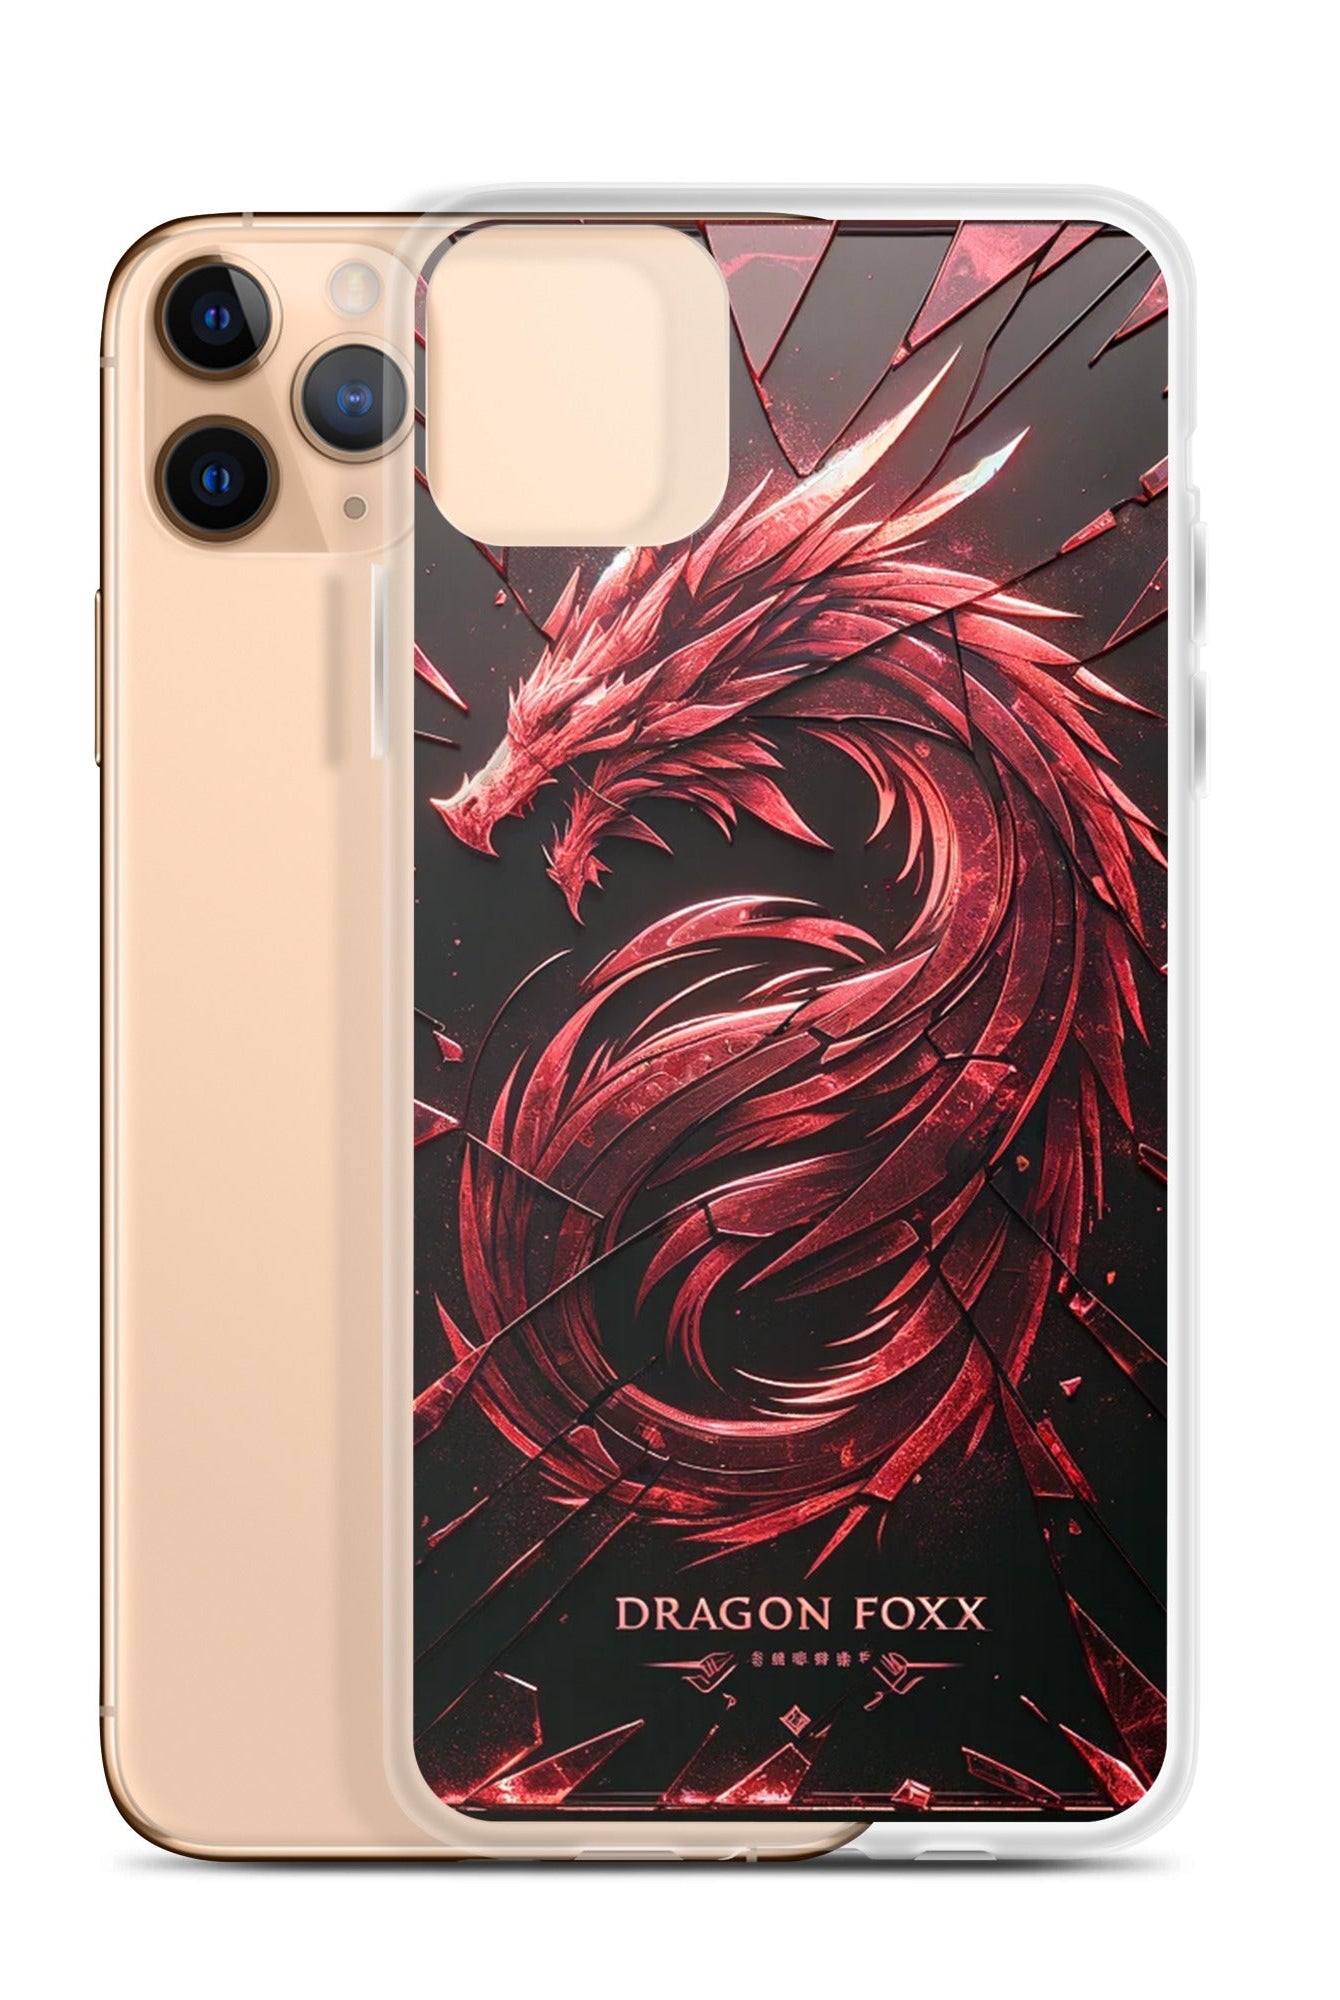 DRAGON FOXX™ Red Dragon Phone Case for iPhone® - Phone Case for iPhone® - DRAGON FOXX™ - DRAGON FOXX™ Red Dragon Phone Case for iPhone® - 7805351_10996 - iPhone 11 Pro Max - Red/Black/Clear - Accessories - Dragon Foxx™ - DRAGON FOXX™ Phone Case for iPhone®